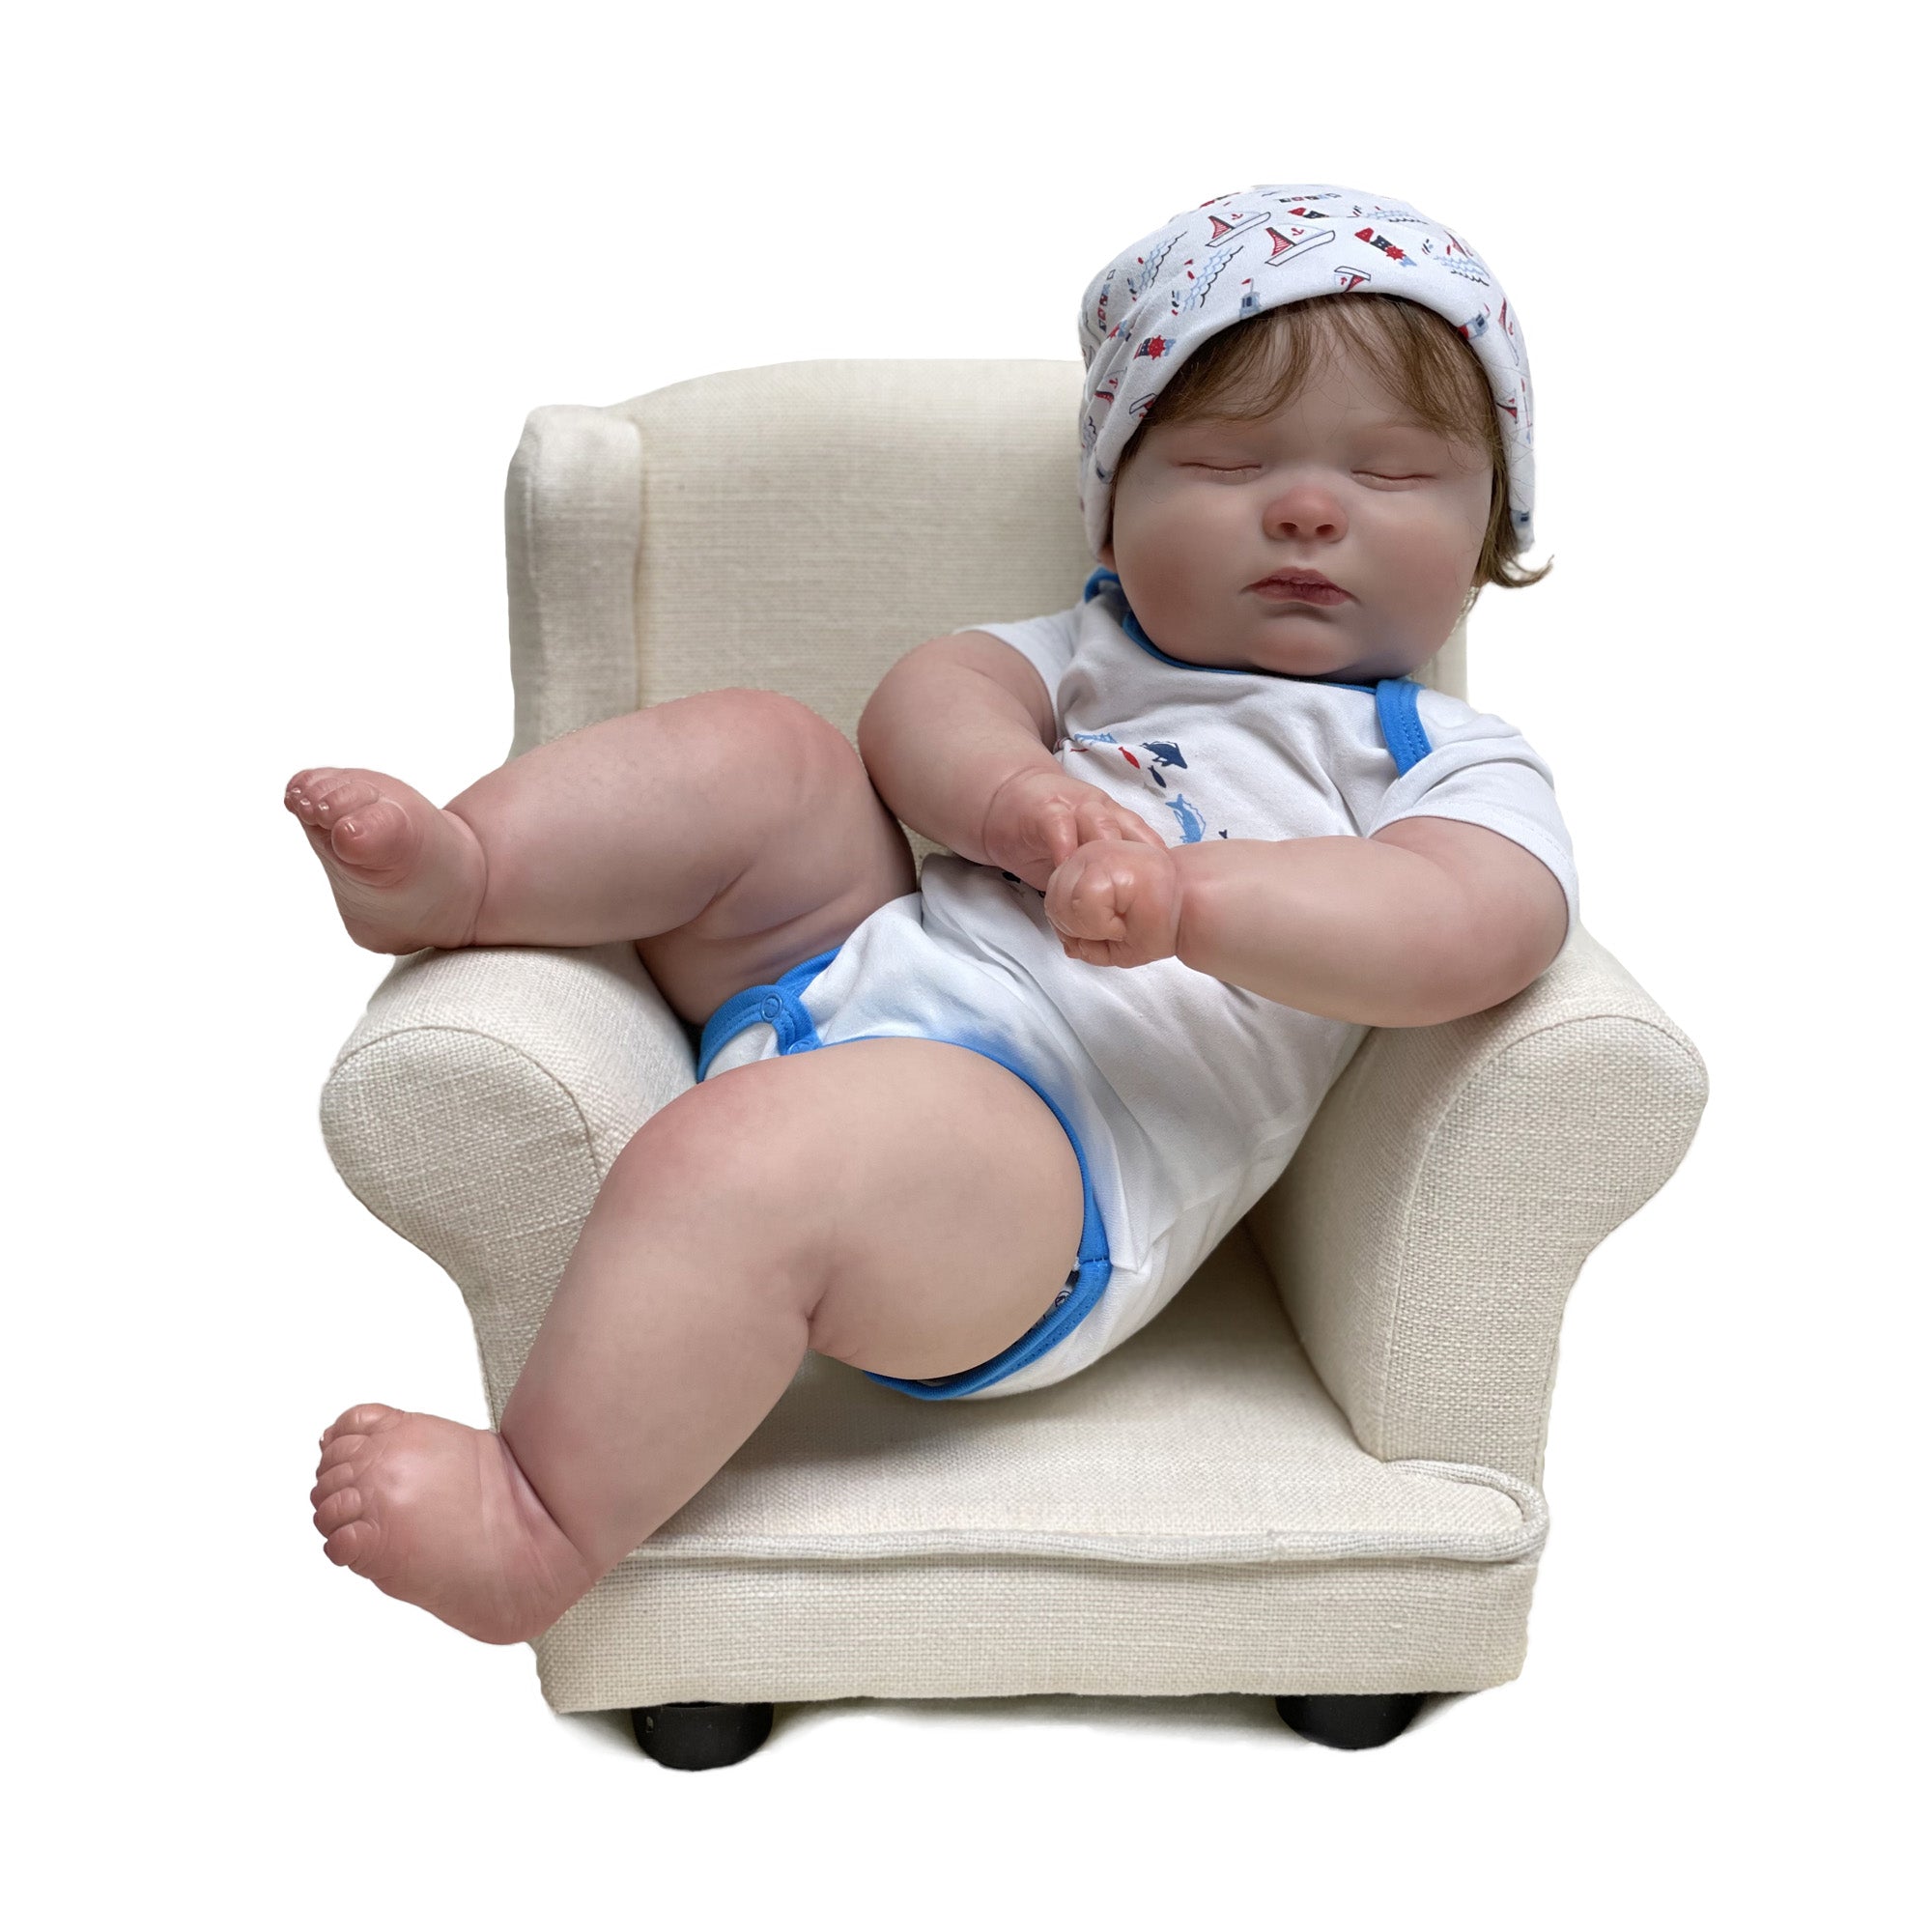 Realistic Bebe Newborn Baby Doll, 24 inches Vinyl Real Toddler Boy Lifelike for Children